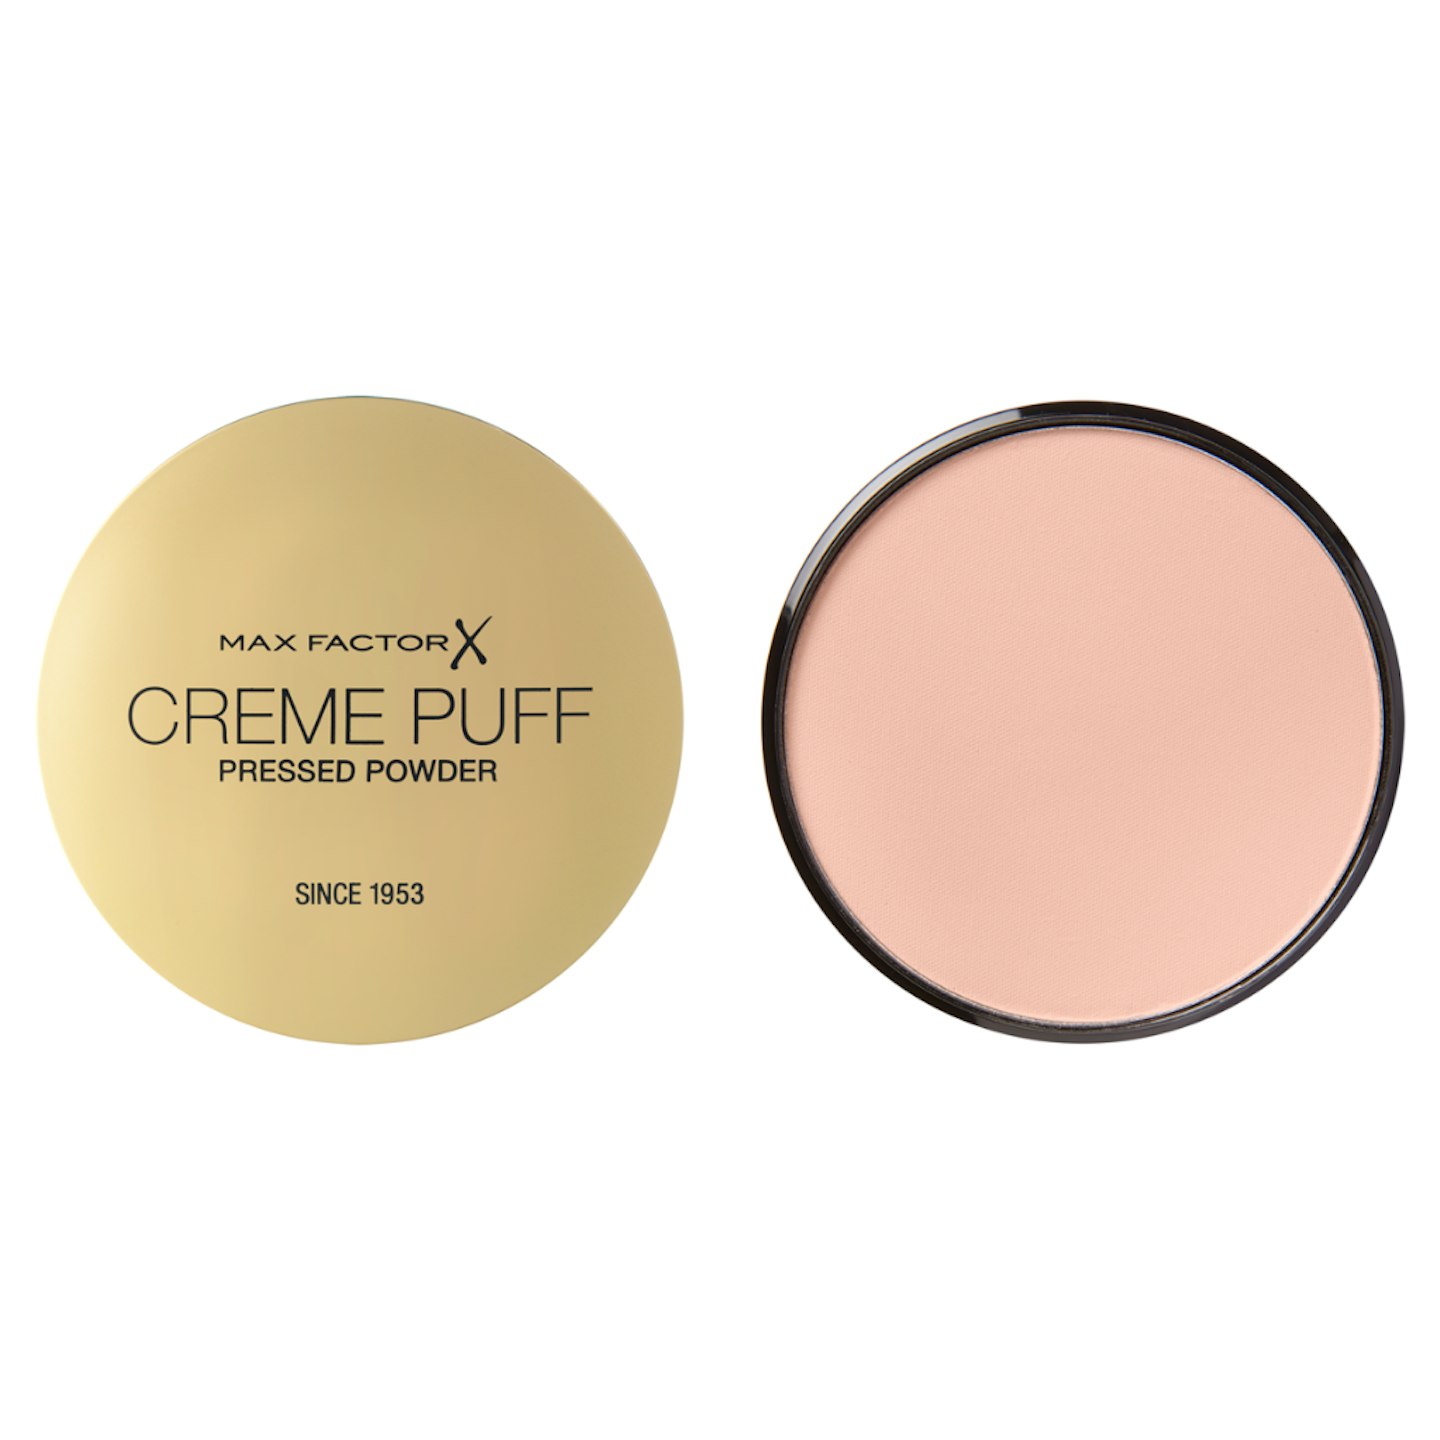 Max Factor Cream Puff Pressed Compact Powder, 21 g in shade 85 - Light 'n' Gay